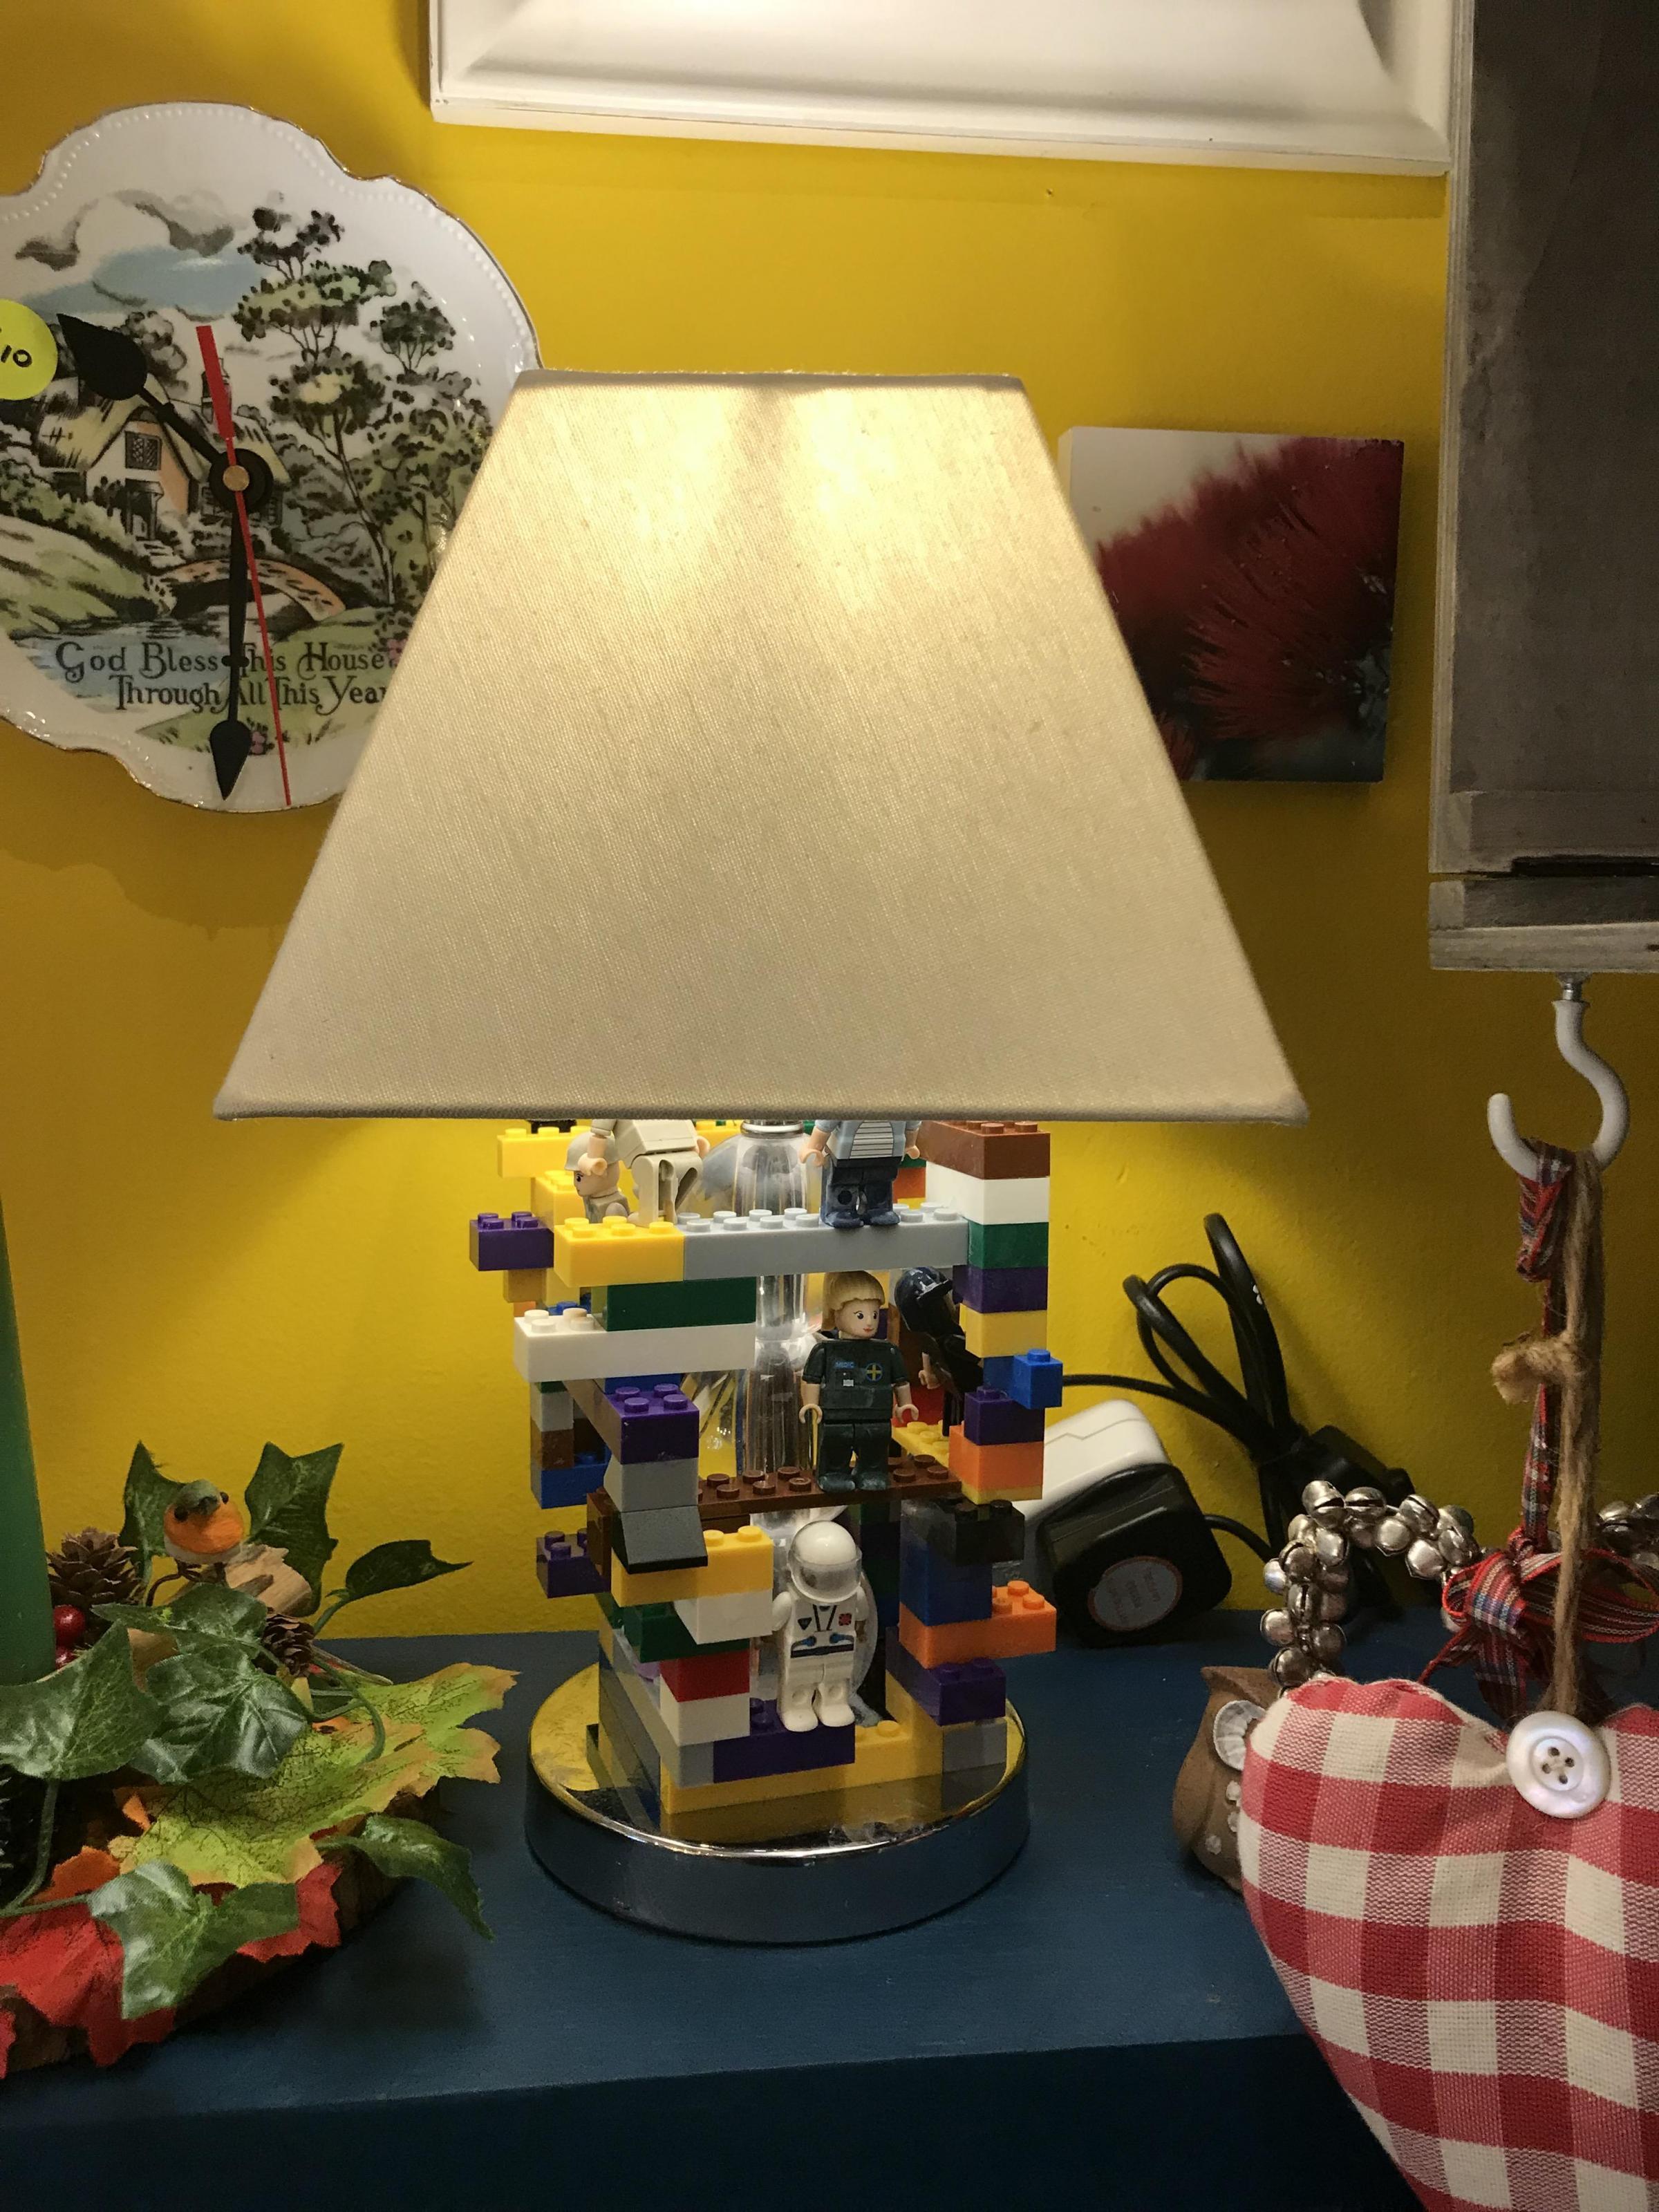 A light made from donated Lego characters for sale in the shop